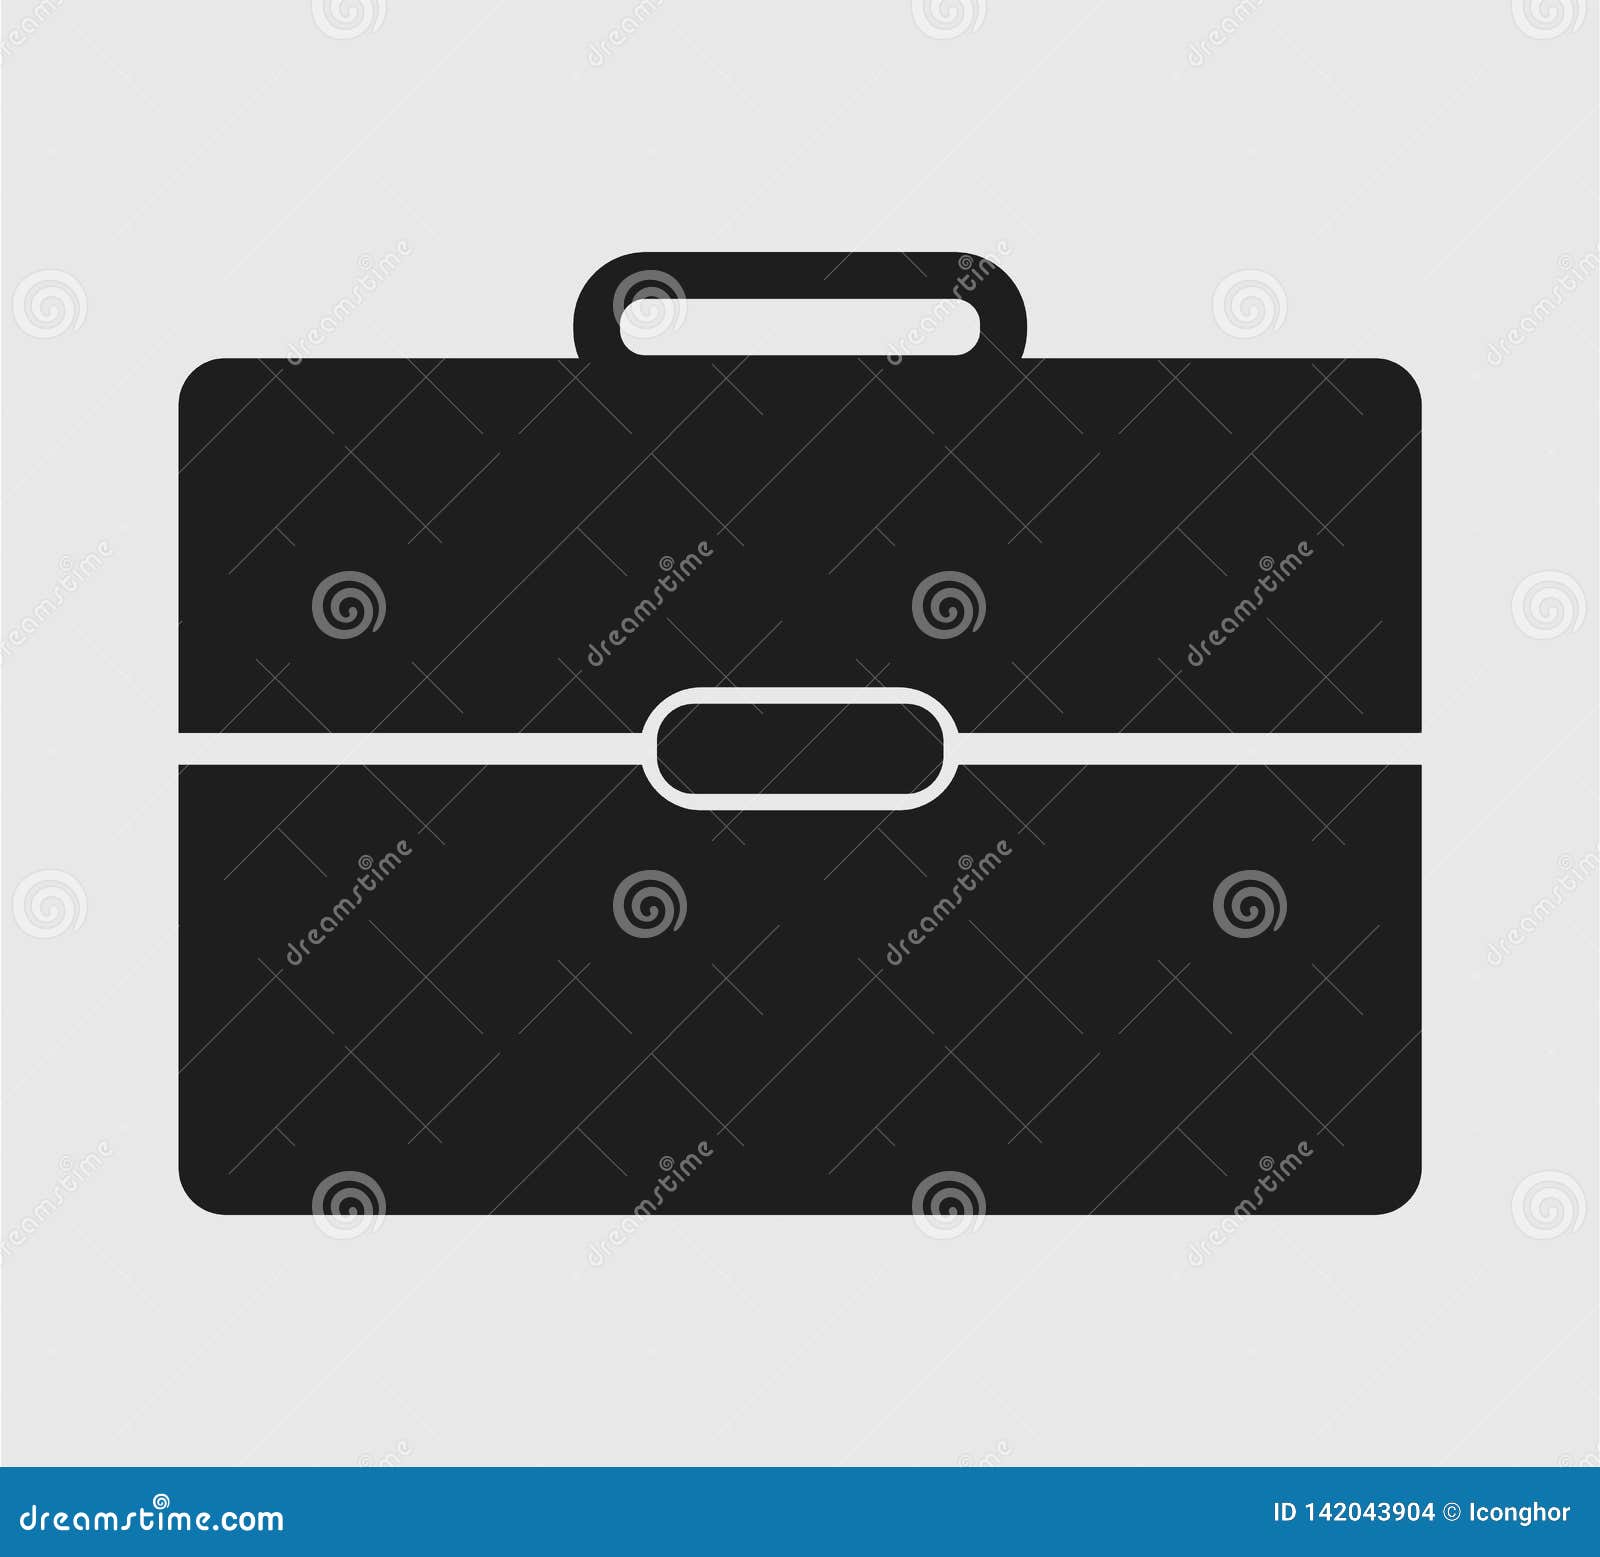 briefcase icon on gray background.